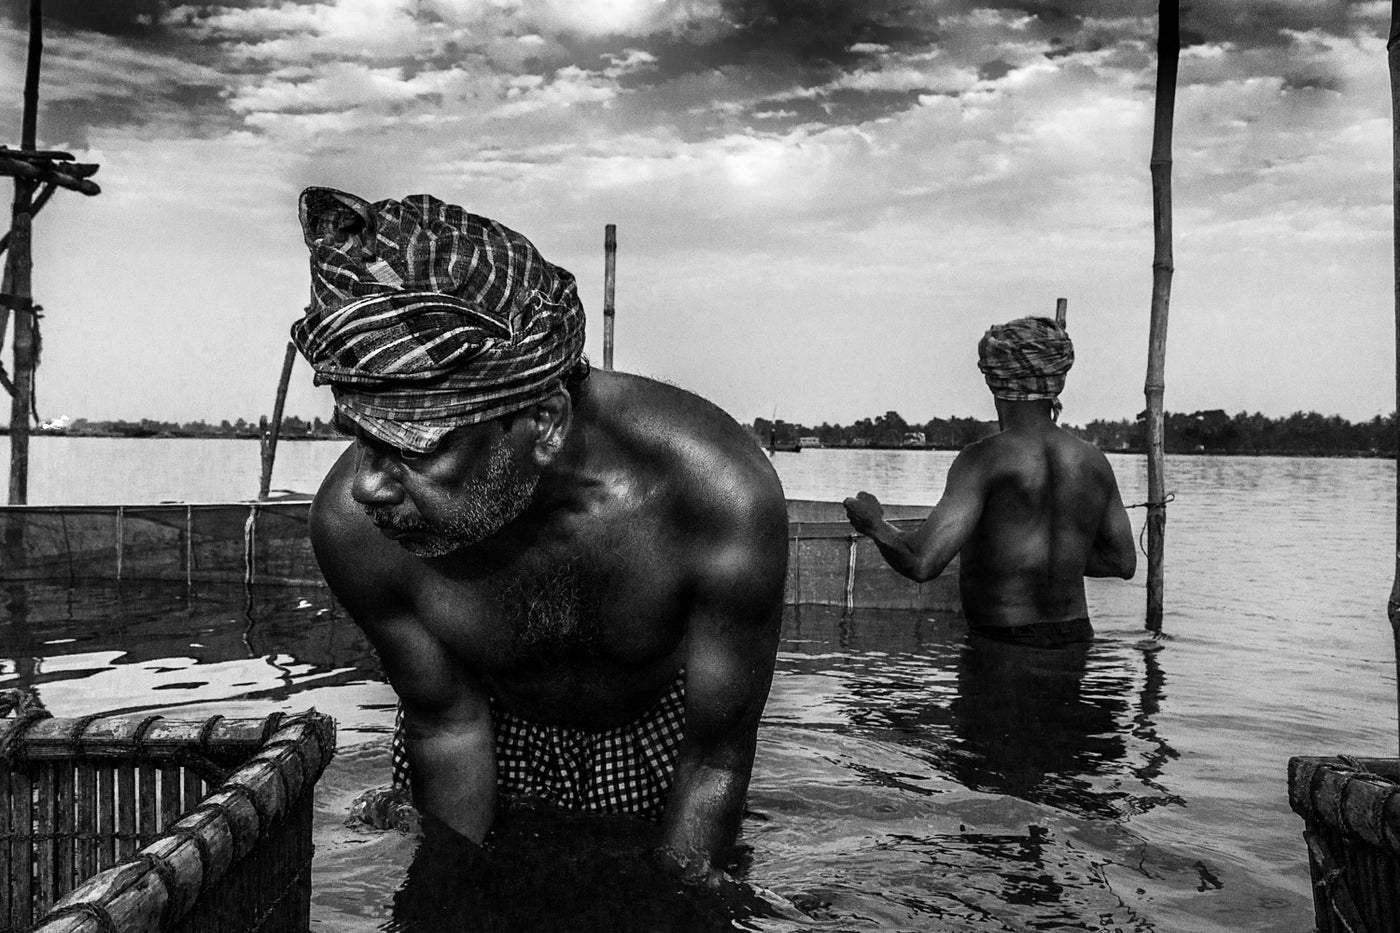 You Fish, I’ll Shoot: Documenting The Lives Of Indian Fishermen